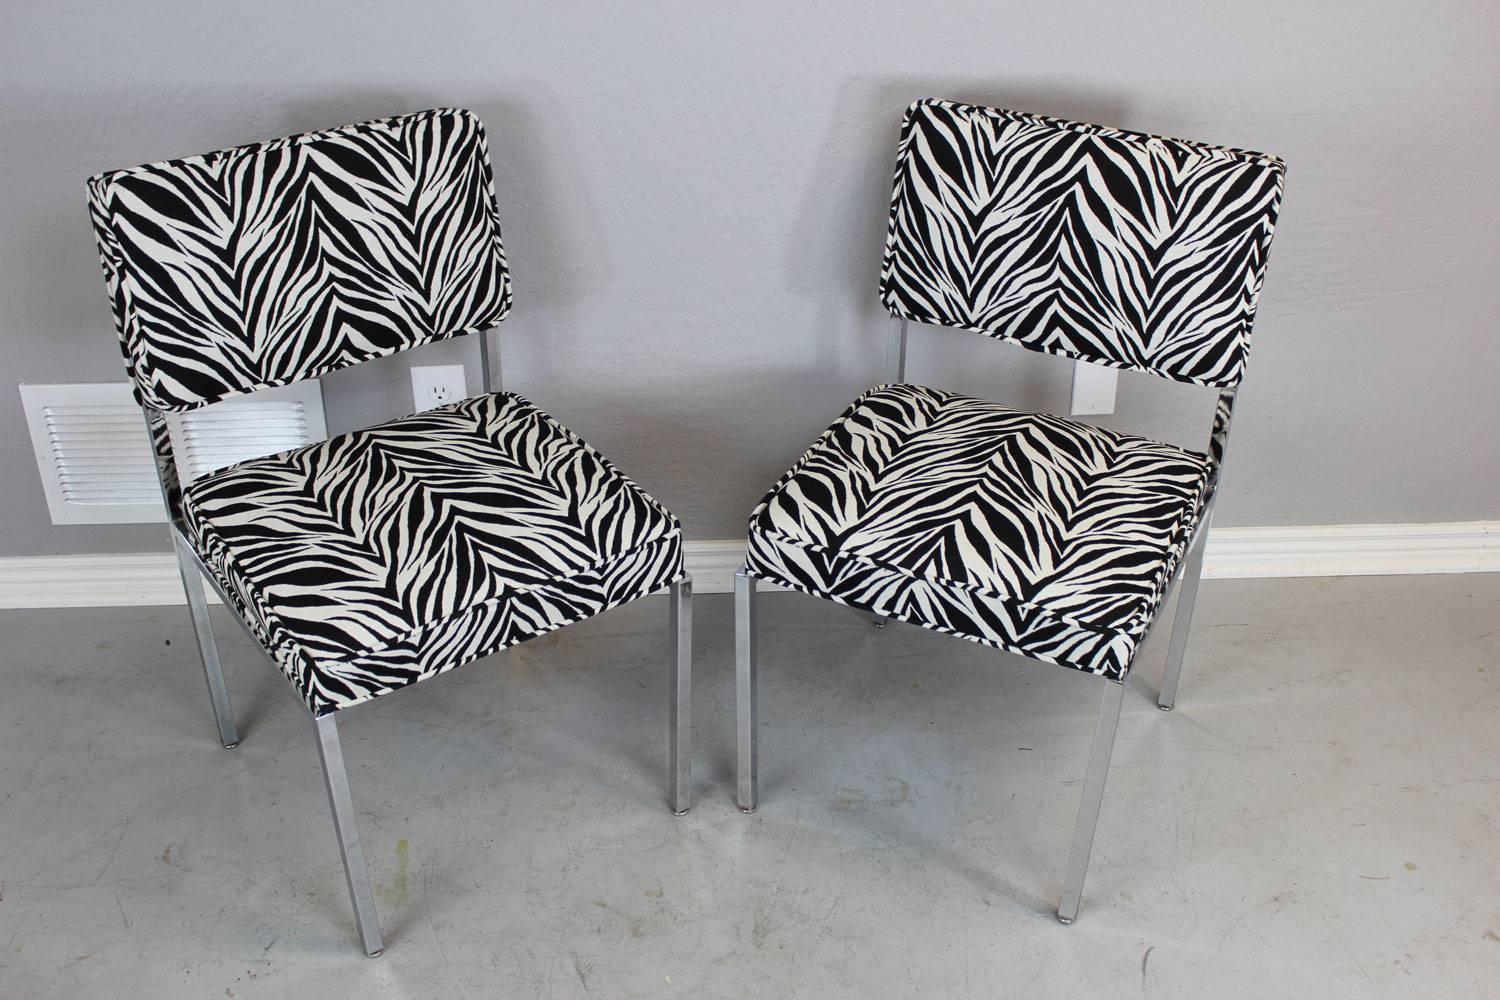 Stainless steel and zebra fabric side chairs in the style of Milo Baughman. Restored.